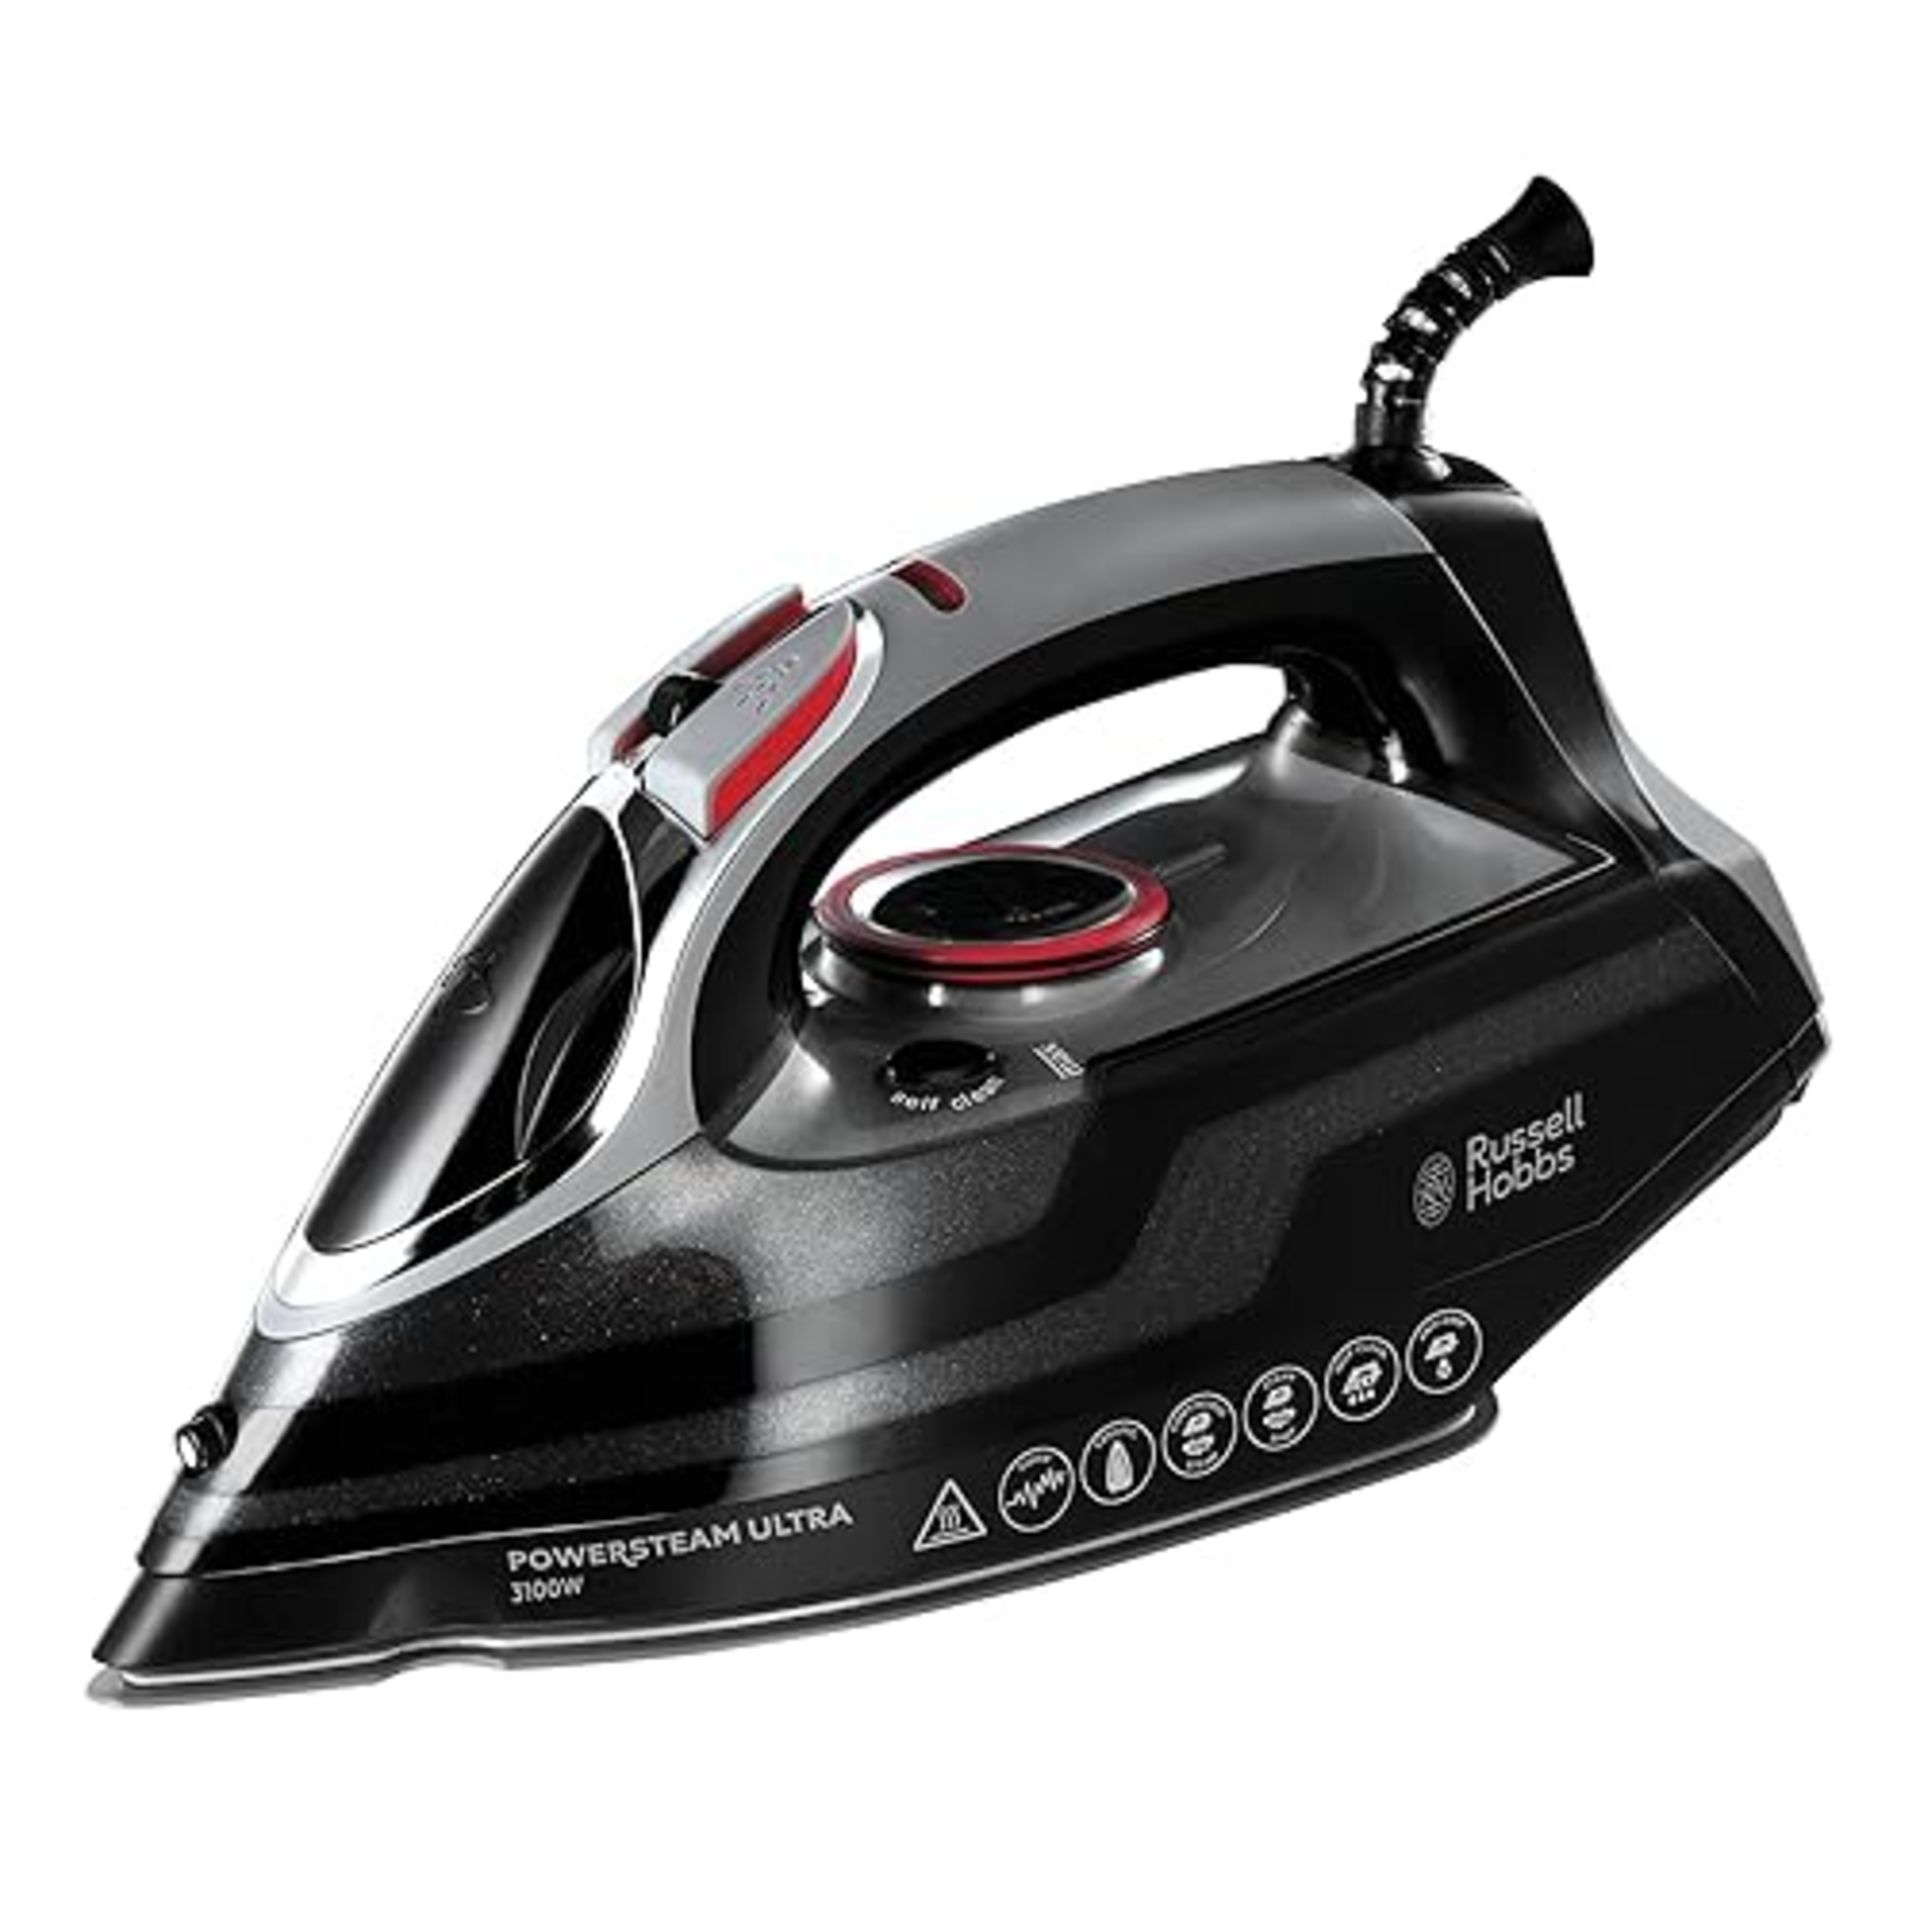 Russell Hobbs Power Steam Ultra Iron, Ceramic Non-stick soleplate, 210g Steam Shot, 70g Continuous 